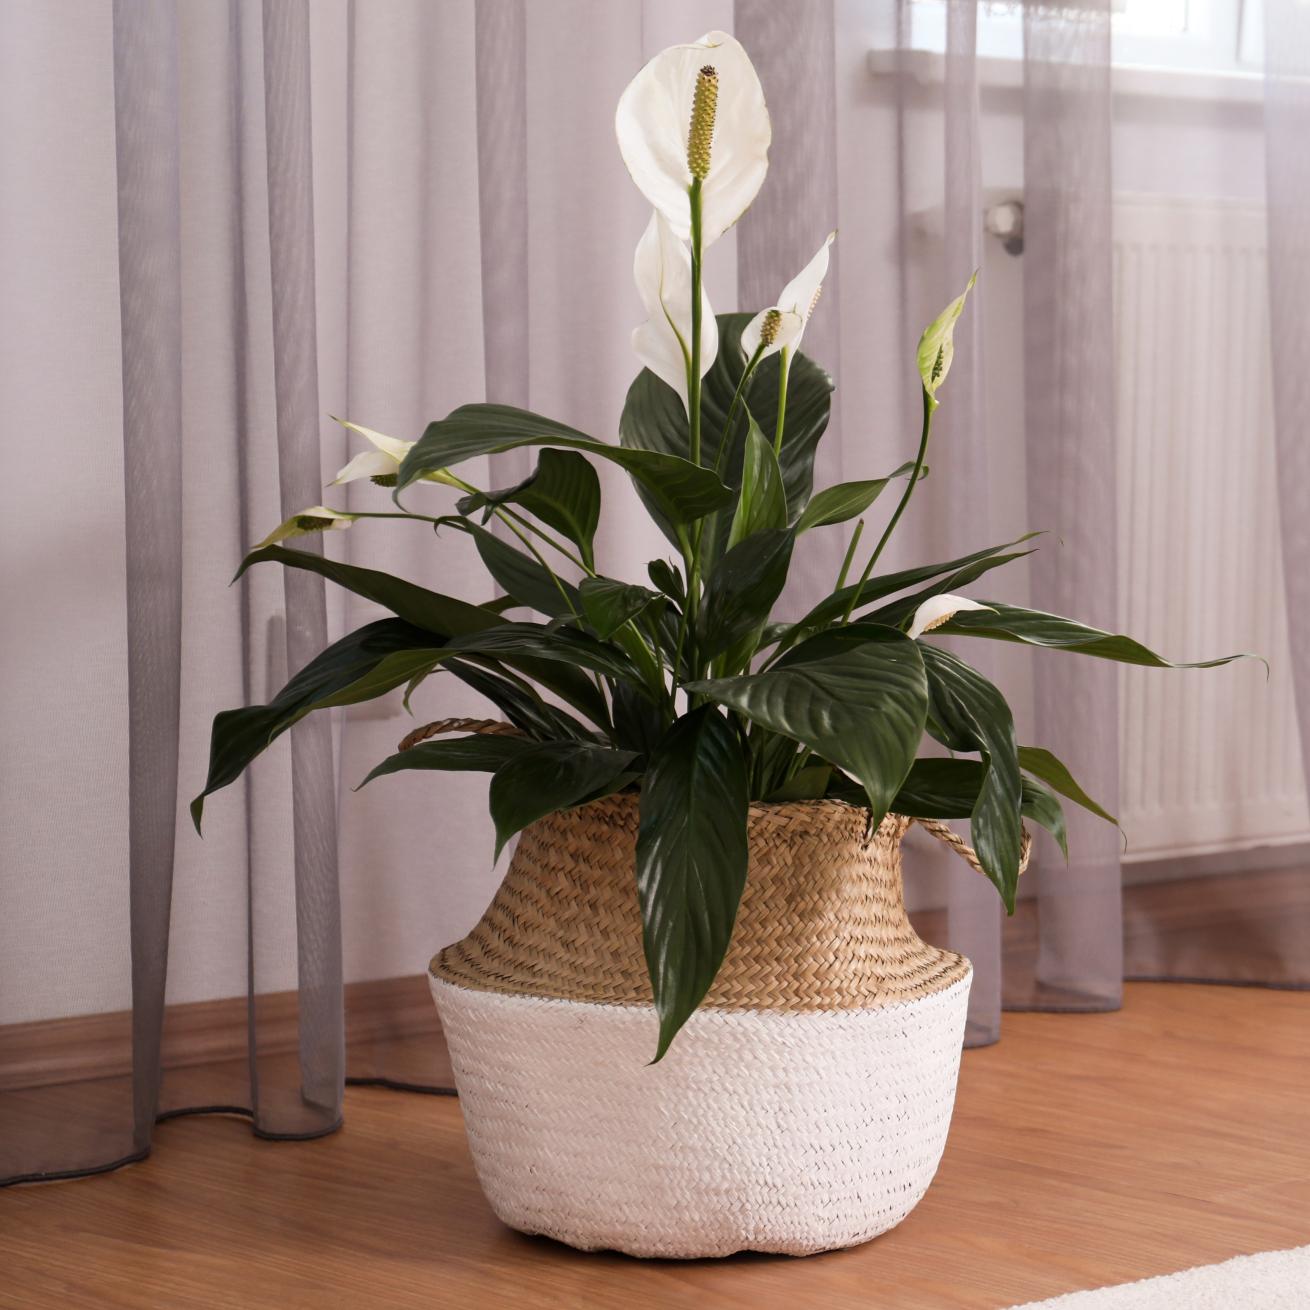 A peace lily plant with a white flower in a wicker basket placed in front of a net curtain